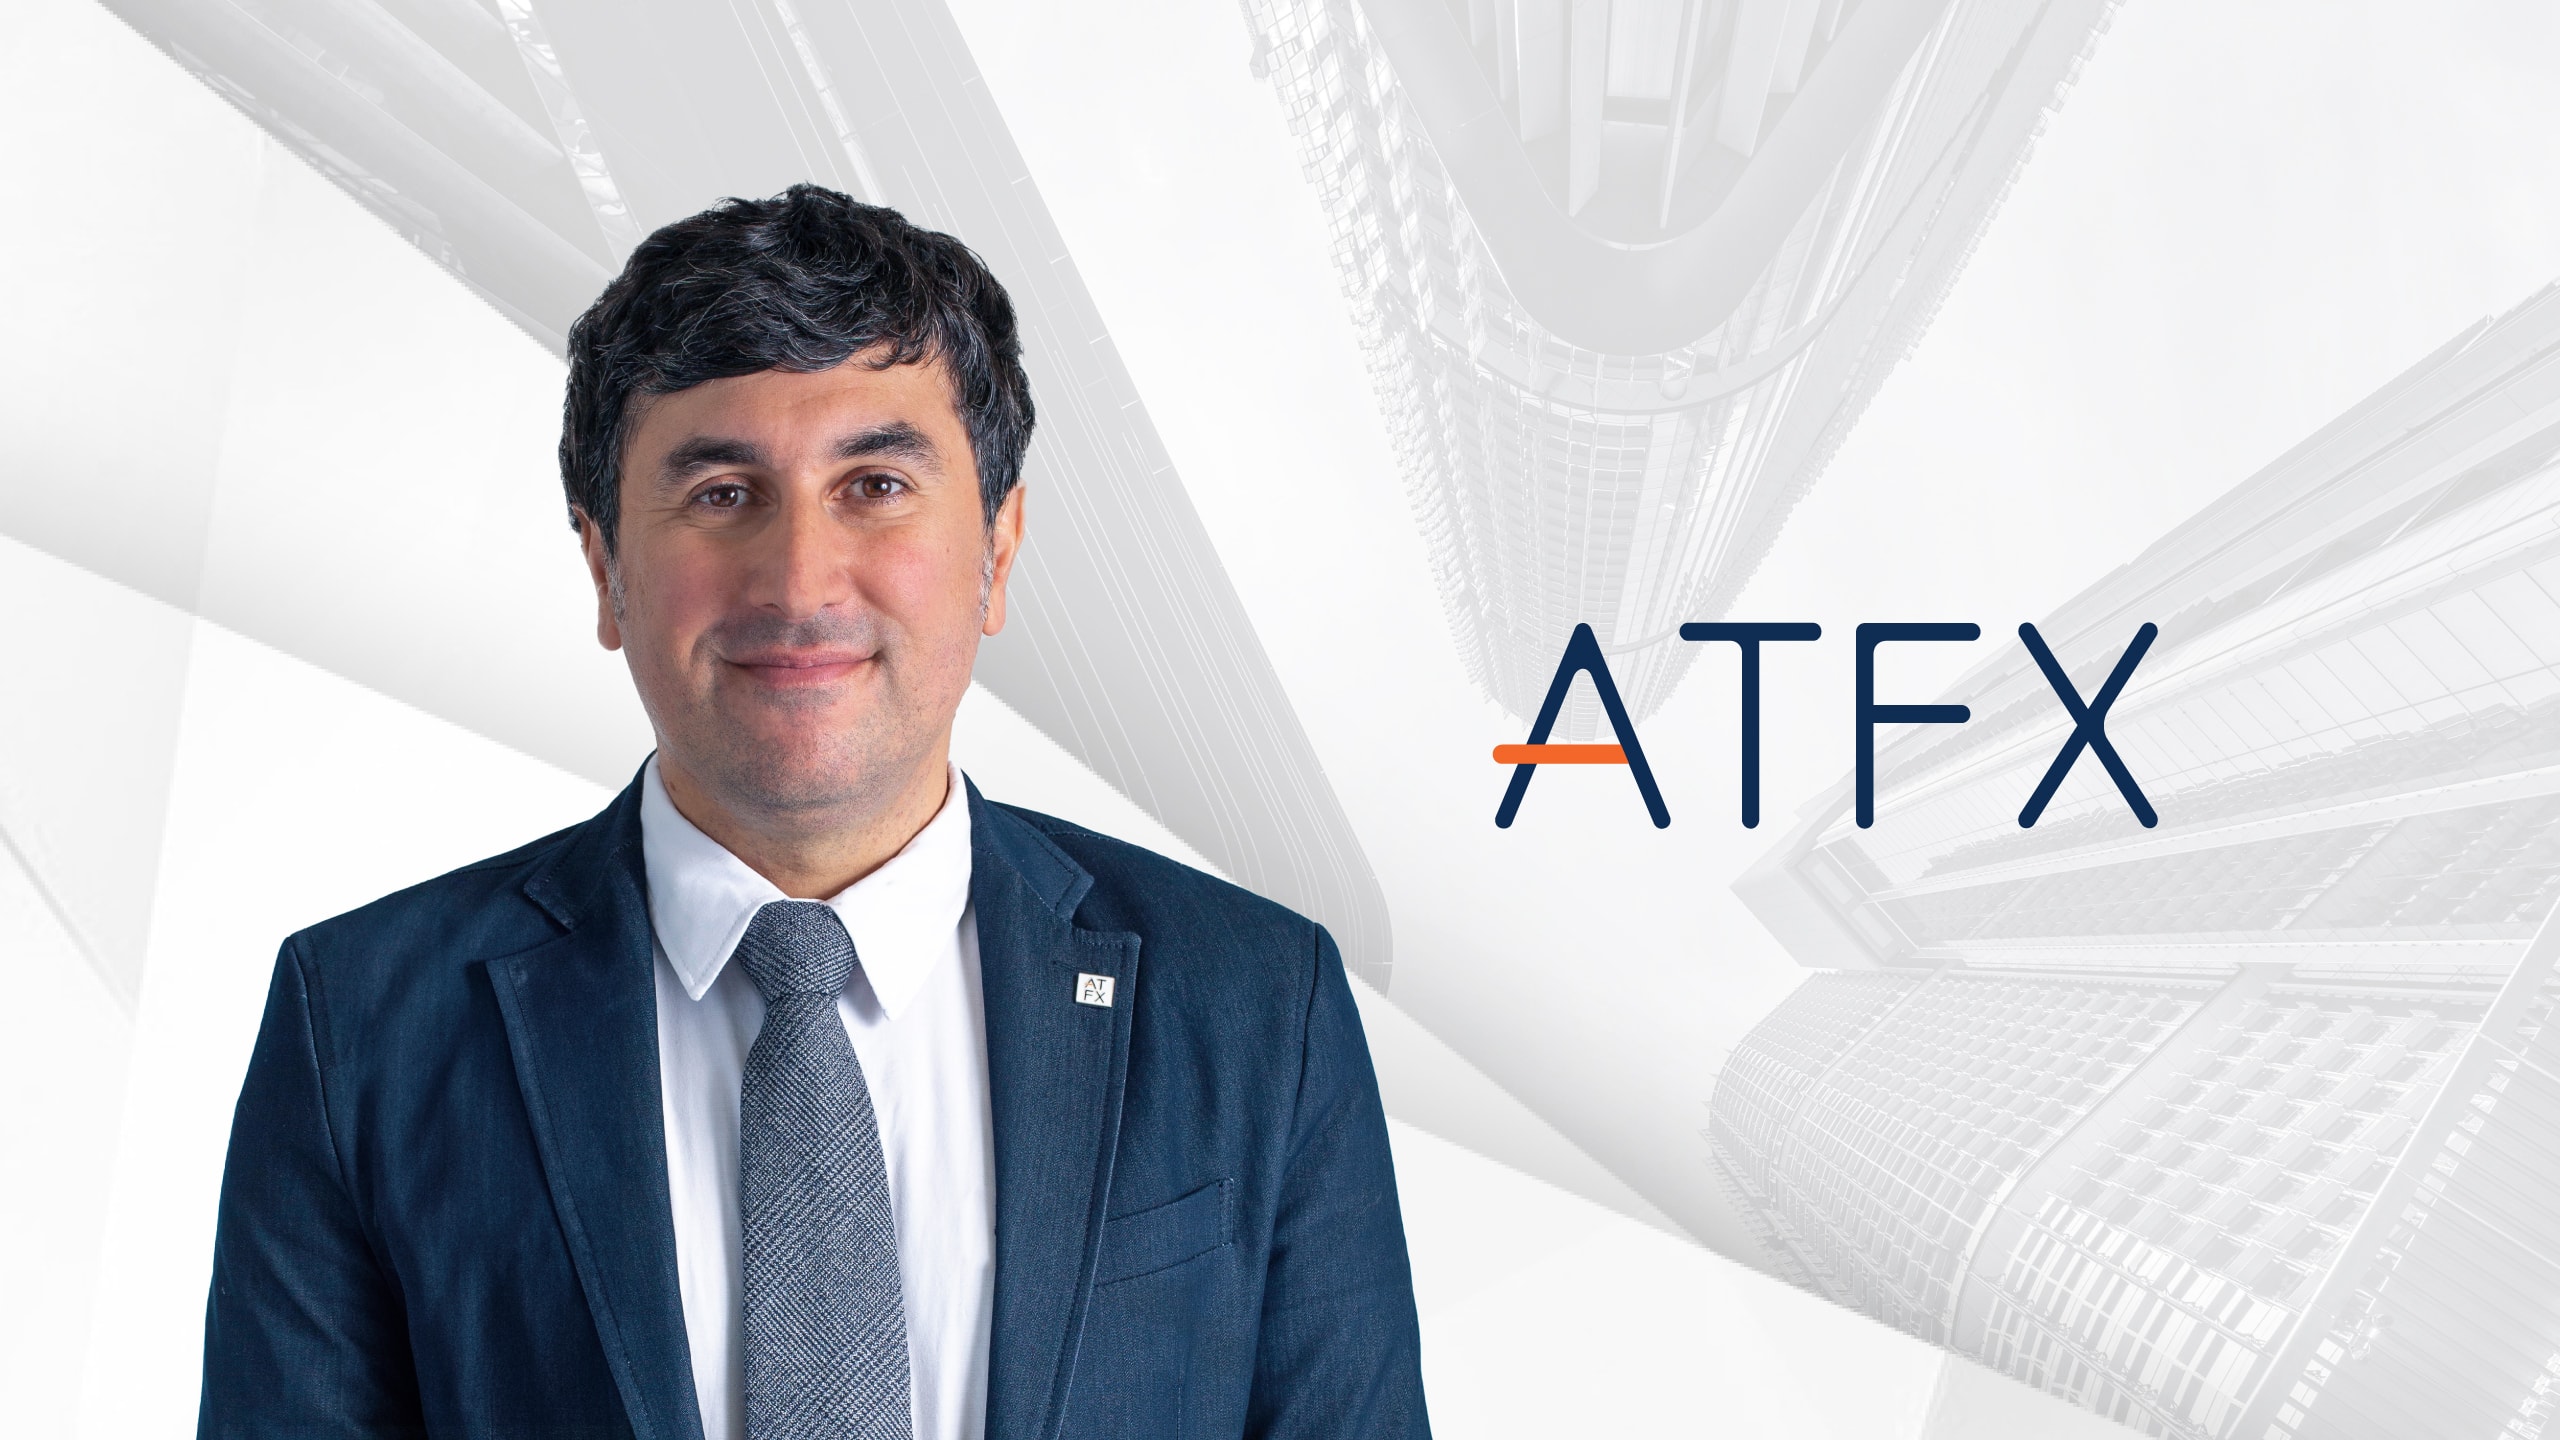 ATFX-Appoints-Ergin-Erdemir-As-Head-Of-LATAM